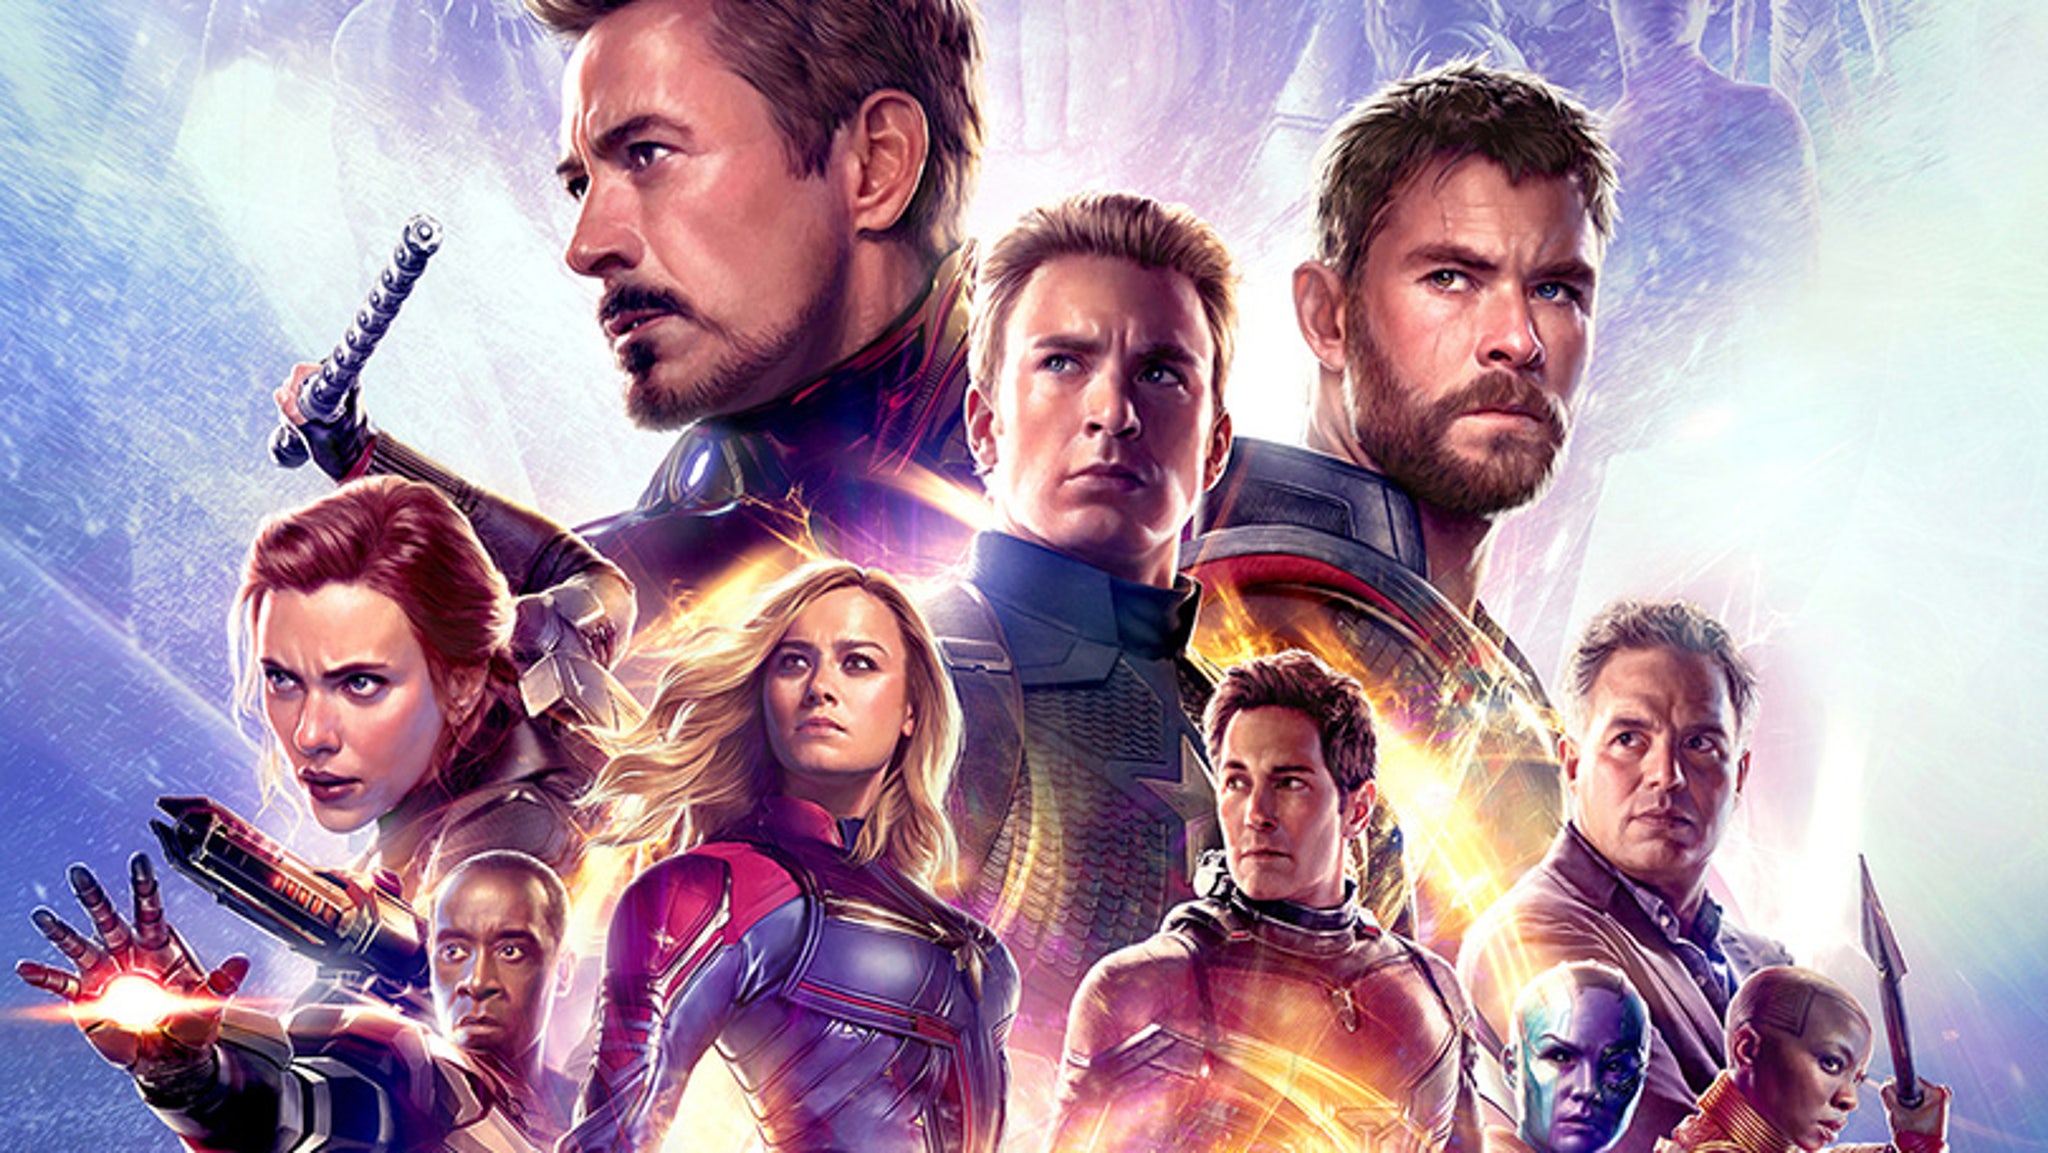 The Critics Have Spoken: Avengers Endgame Early Reviews Are In